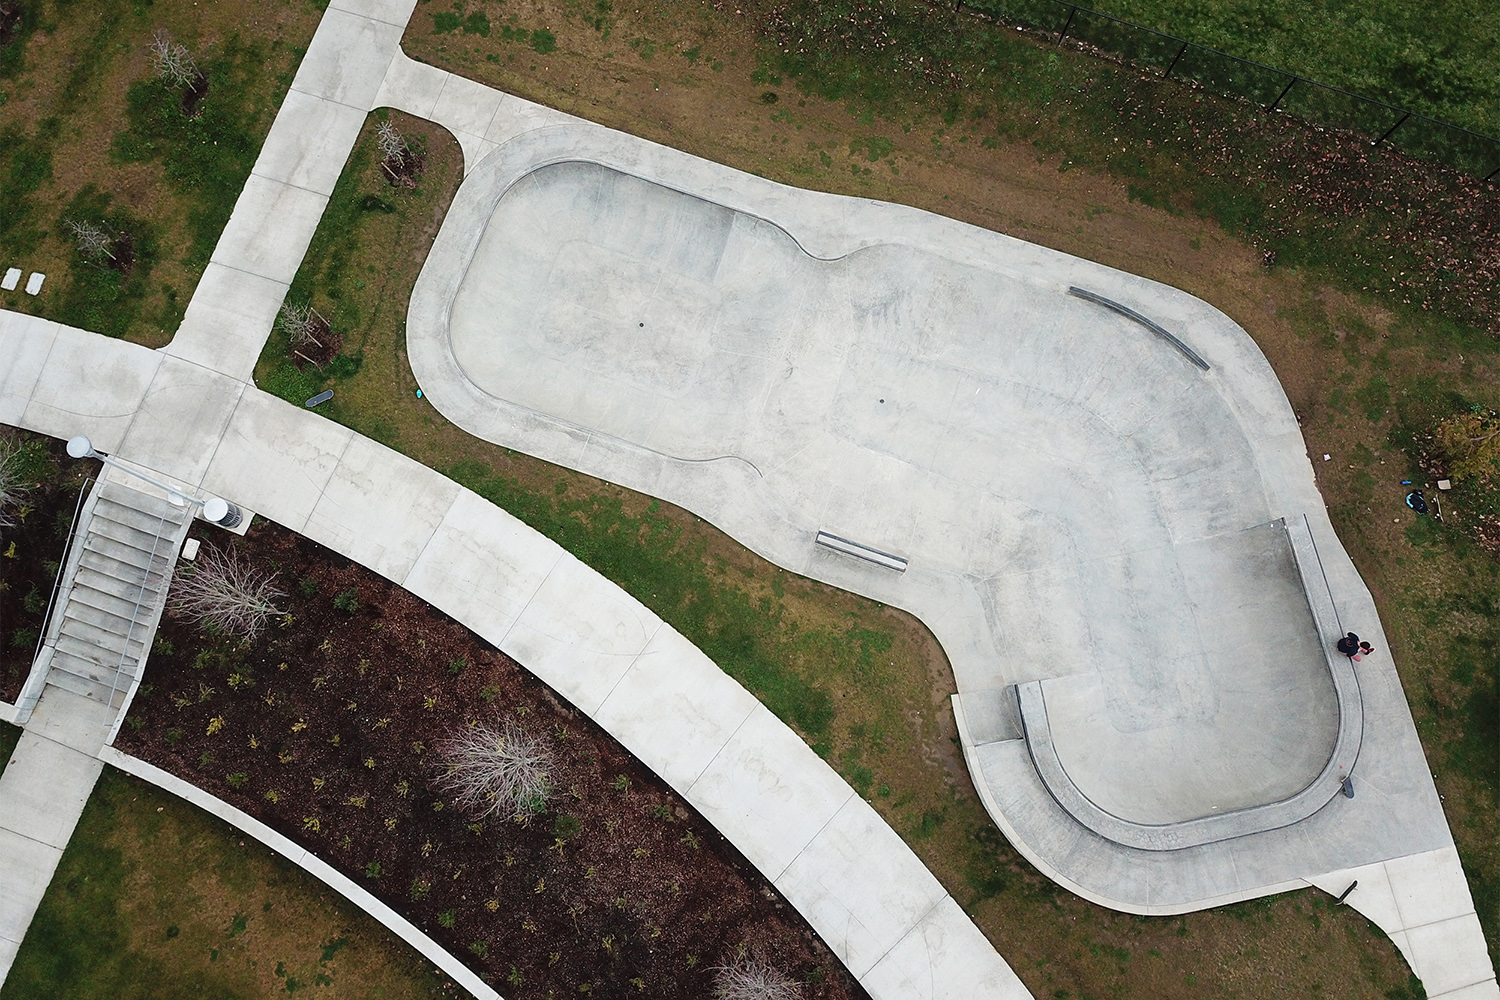  An aerial overview of the Skate Spot at Luuwit View Park 